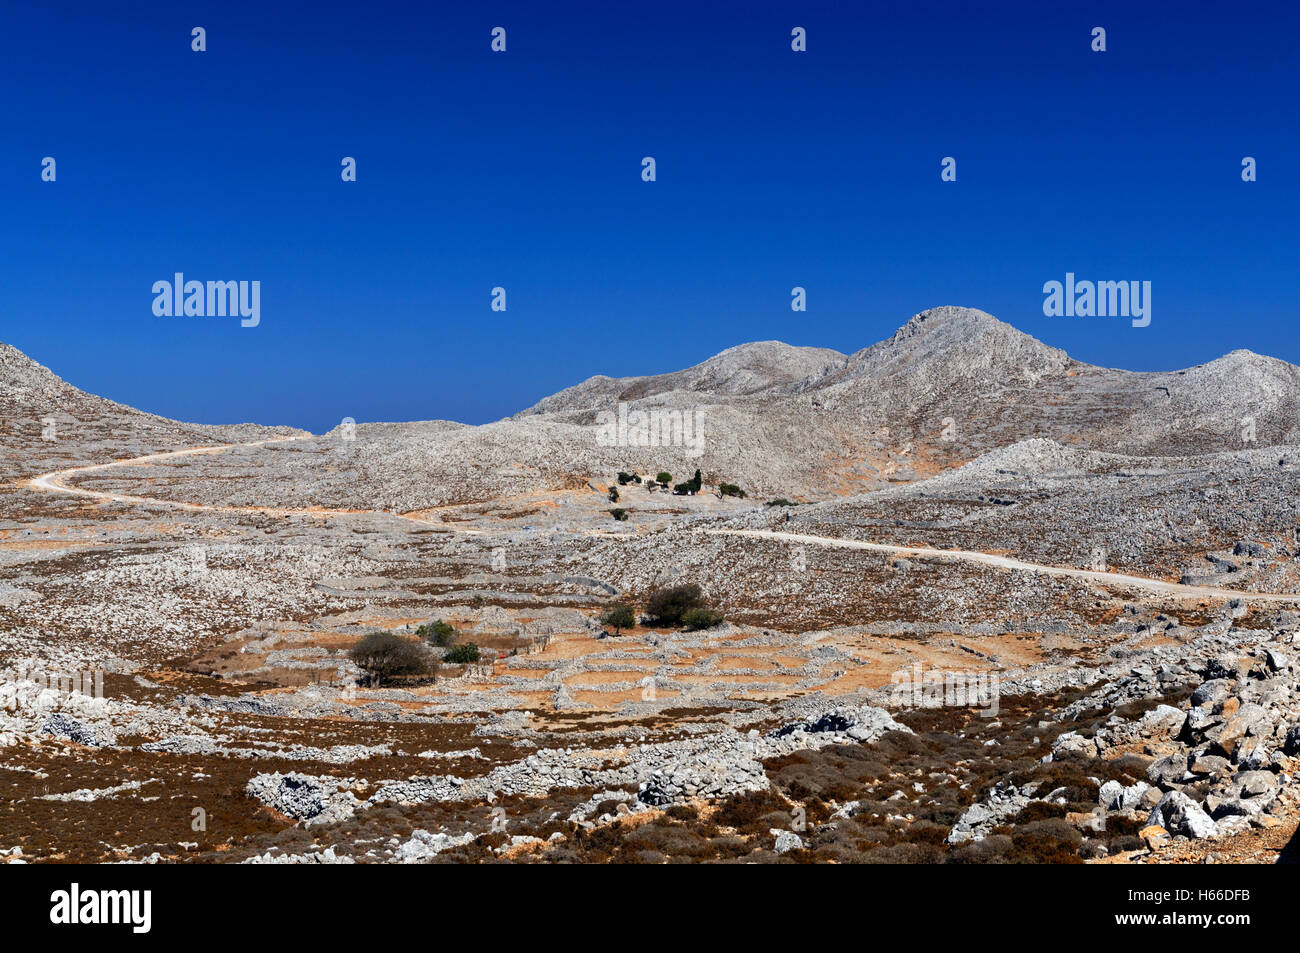 Remote and wild mountain landscape high up in the mountainous interior of Chalki Island near Rhodes, Dodecanese Islands, Greece. Stock Photo